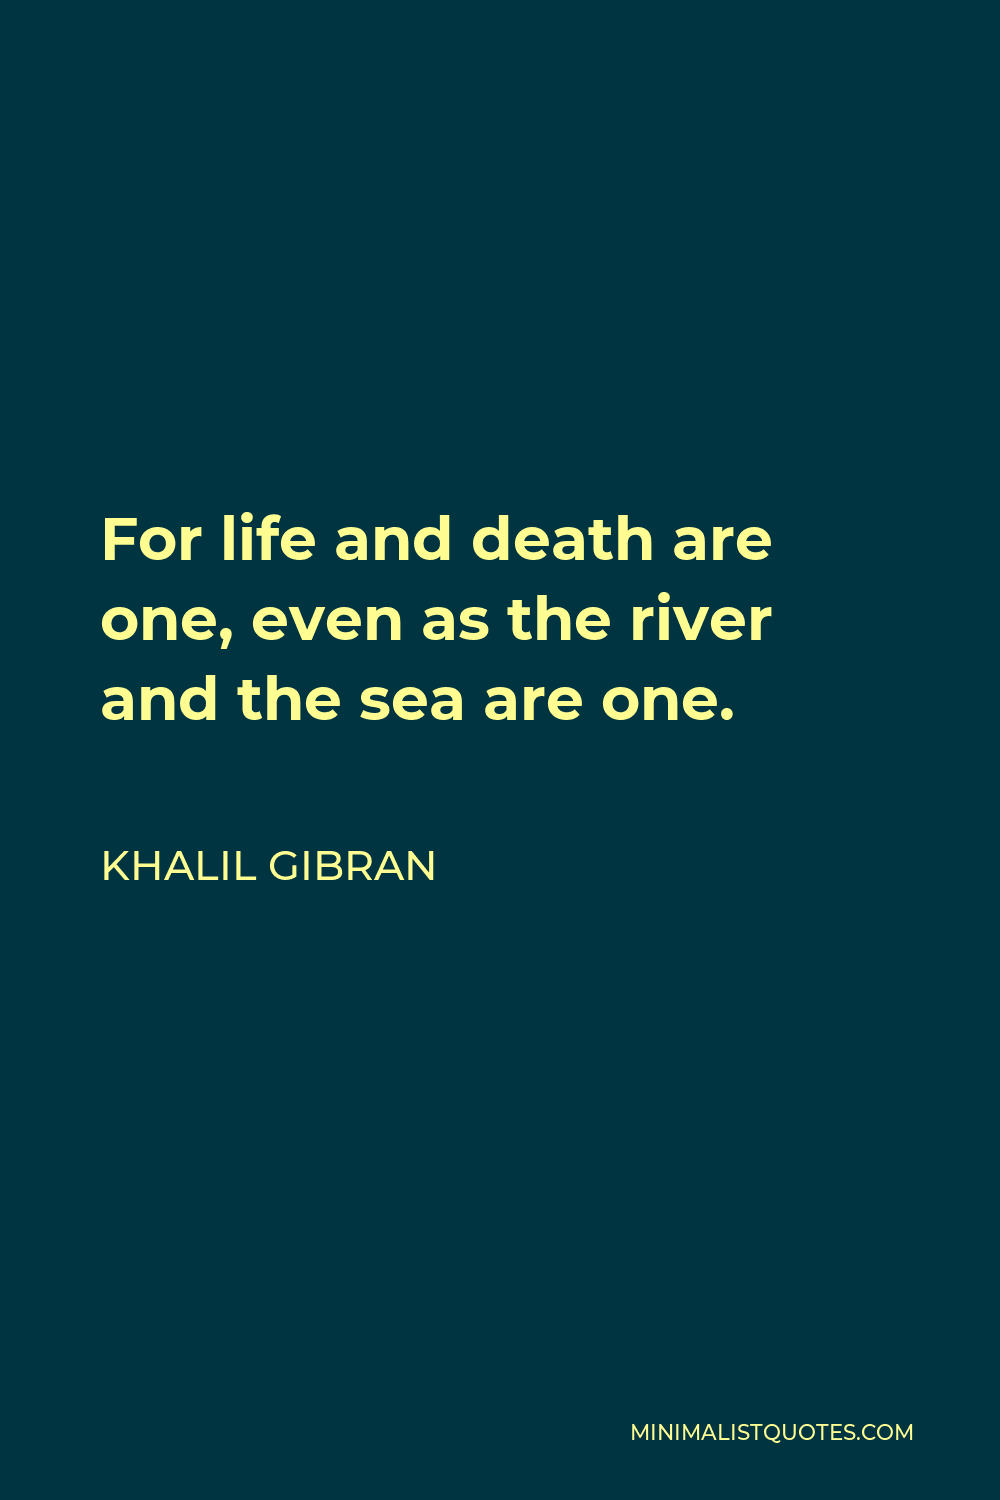 Khalil Gibran Quote - For life and death are one, even as the river and the sea are one.